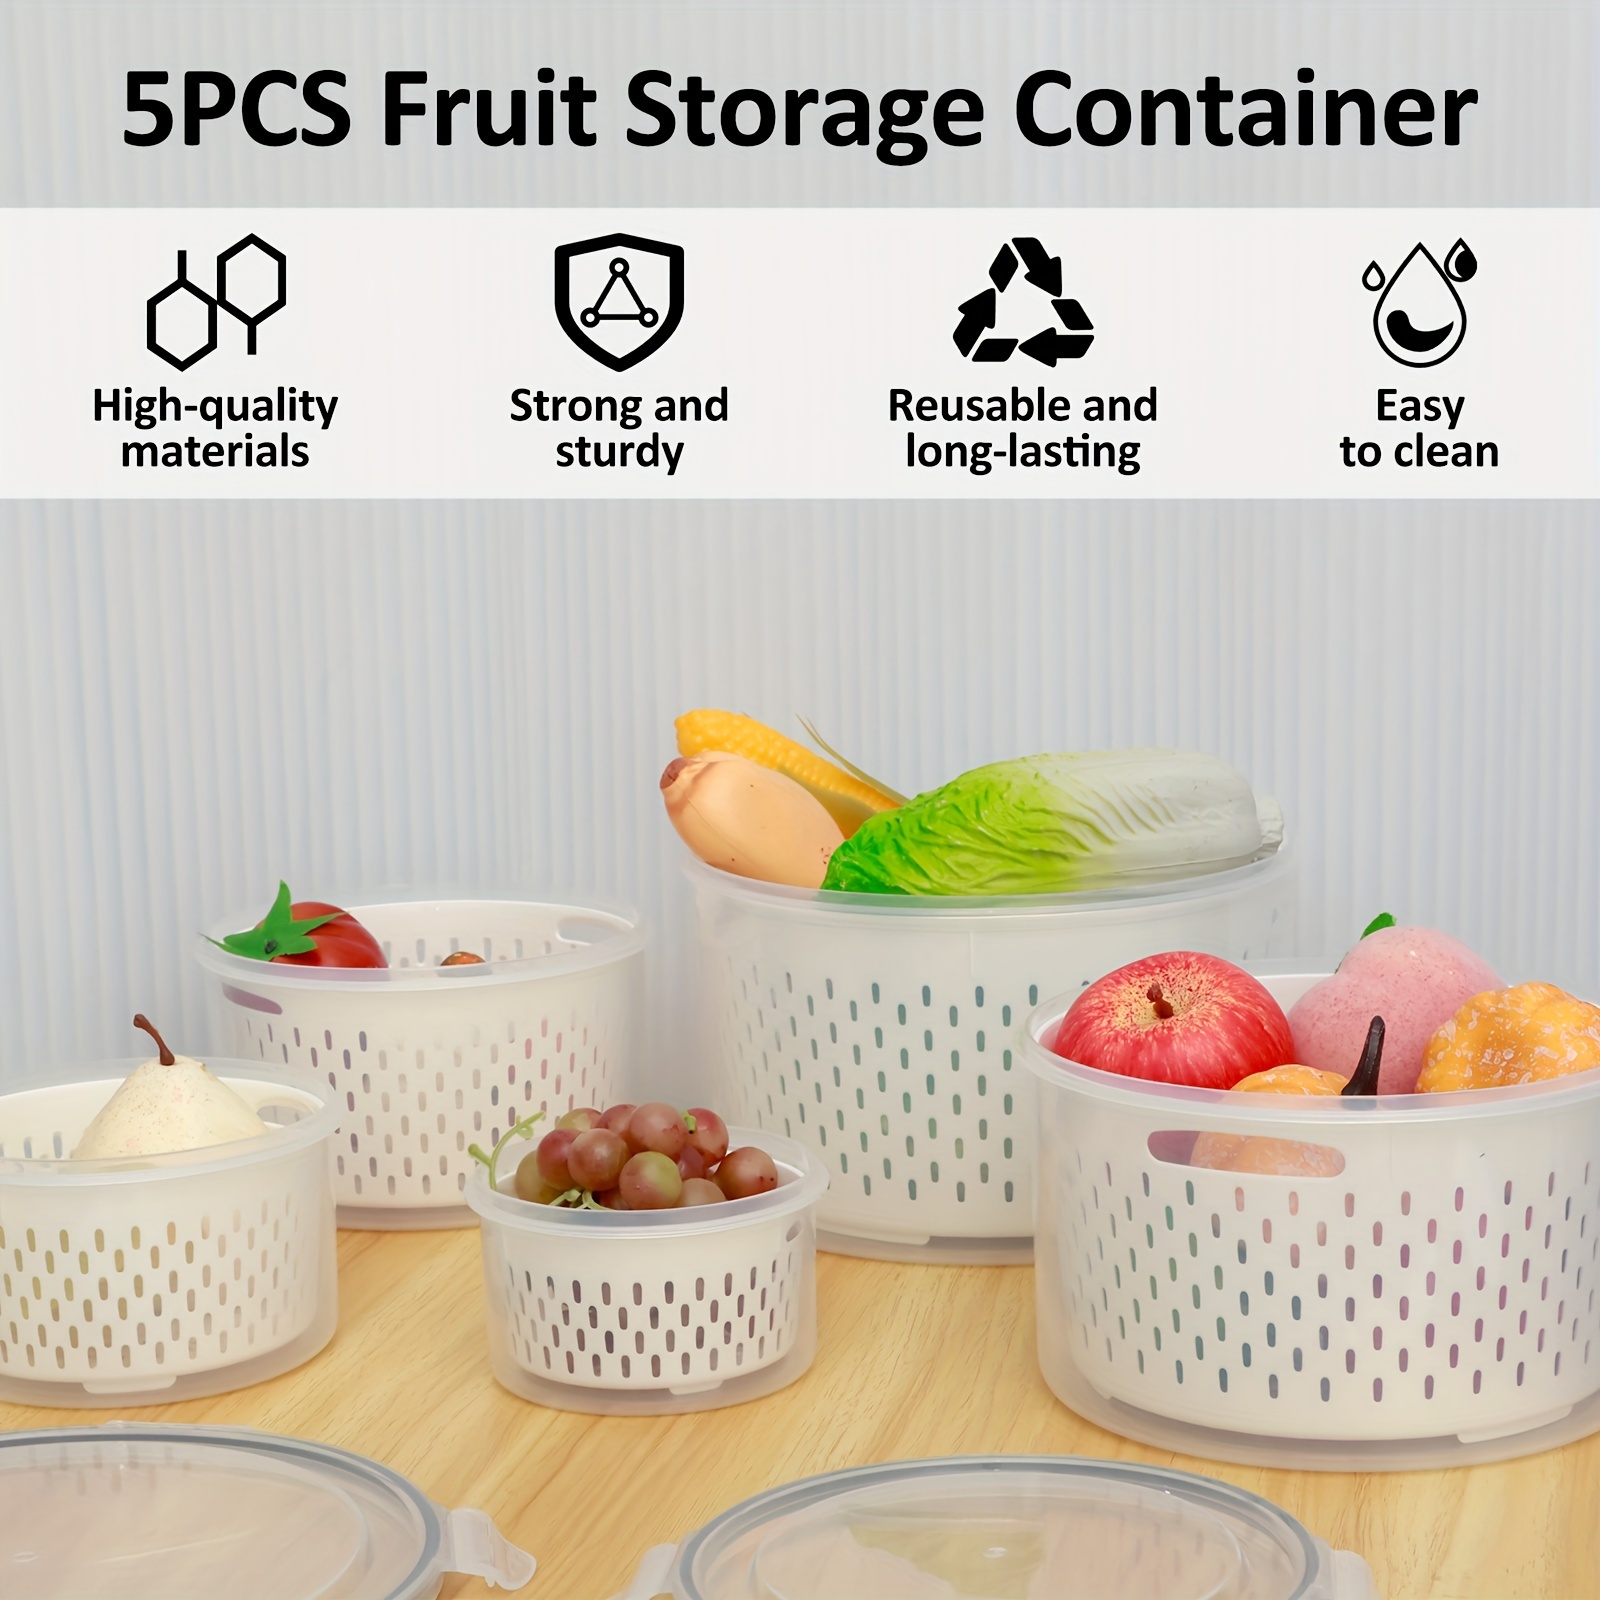 Stackable Freezer Storage Containers